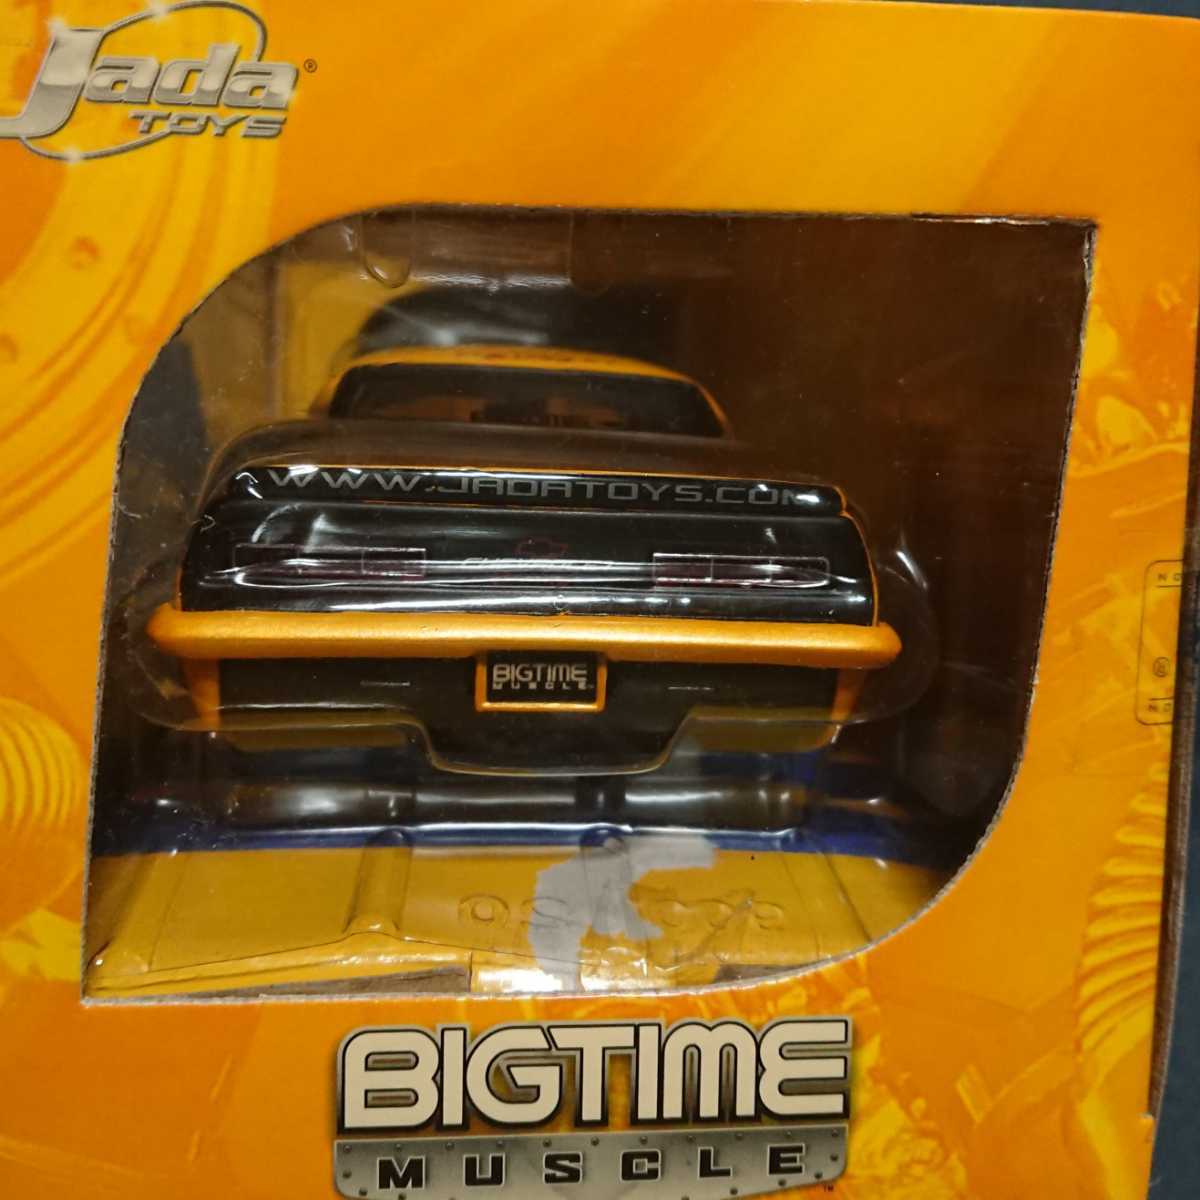 1/24 JADA TOYS 1969 シェビー カマロ DUB CITY BIGTIME MUSCLEの画像4